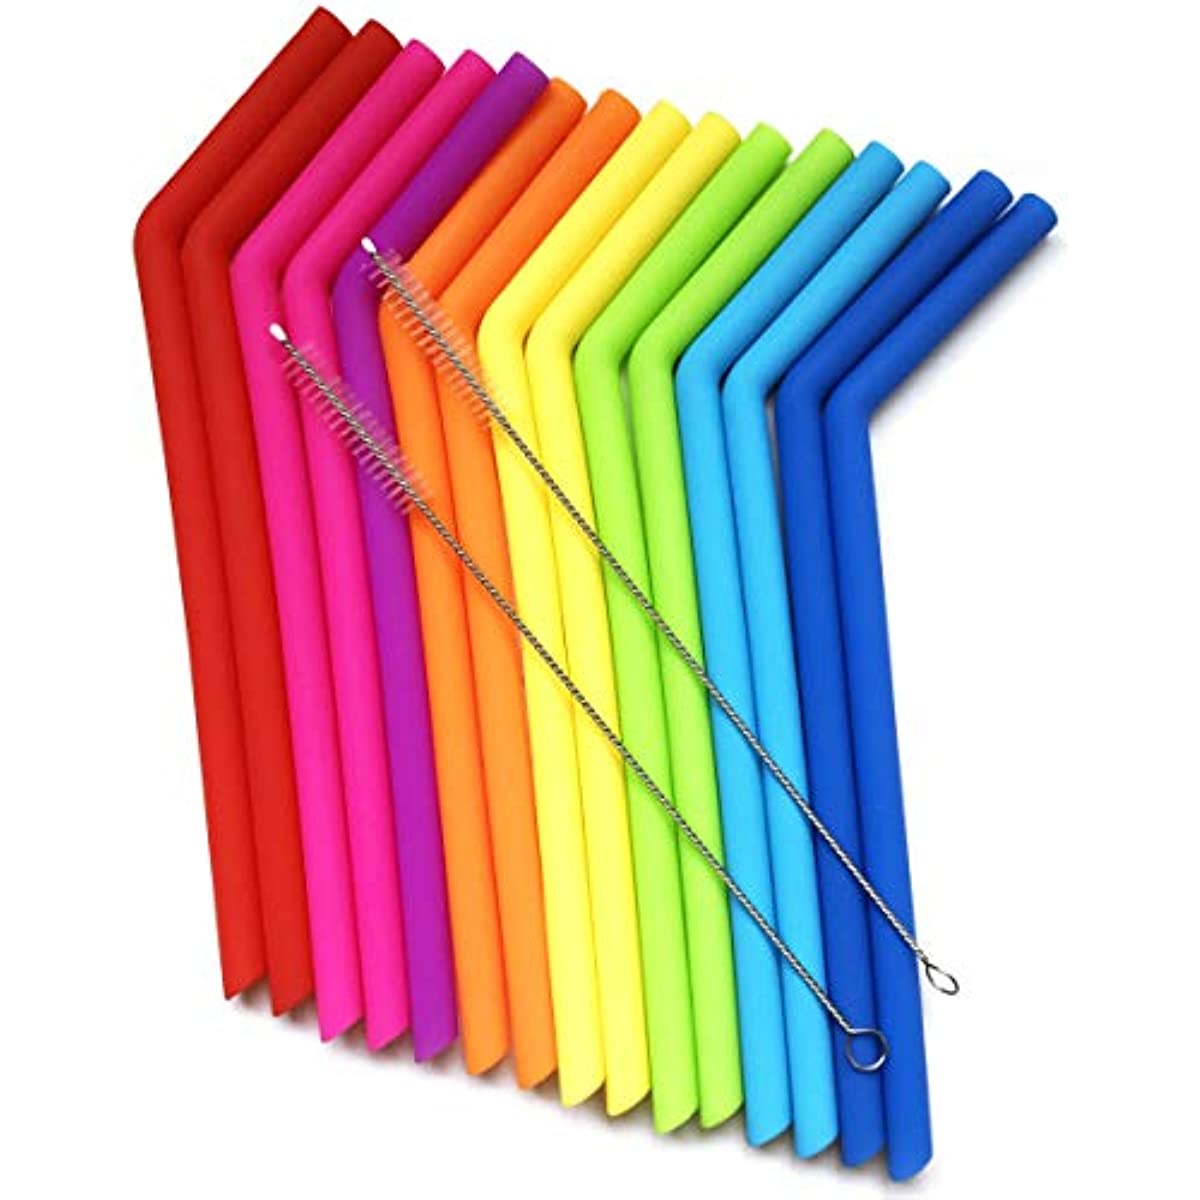 15 FITS ALL TUMBLERS STRAWS Reusable Silicone Straws For 30 And 20 Oz Yeti - Flexible Easy To Clean + 2 Cleaning Brushes BPA Free